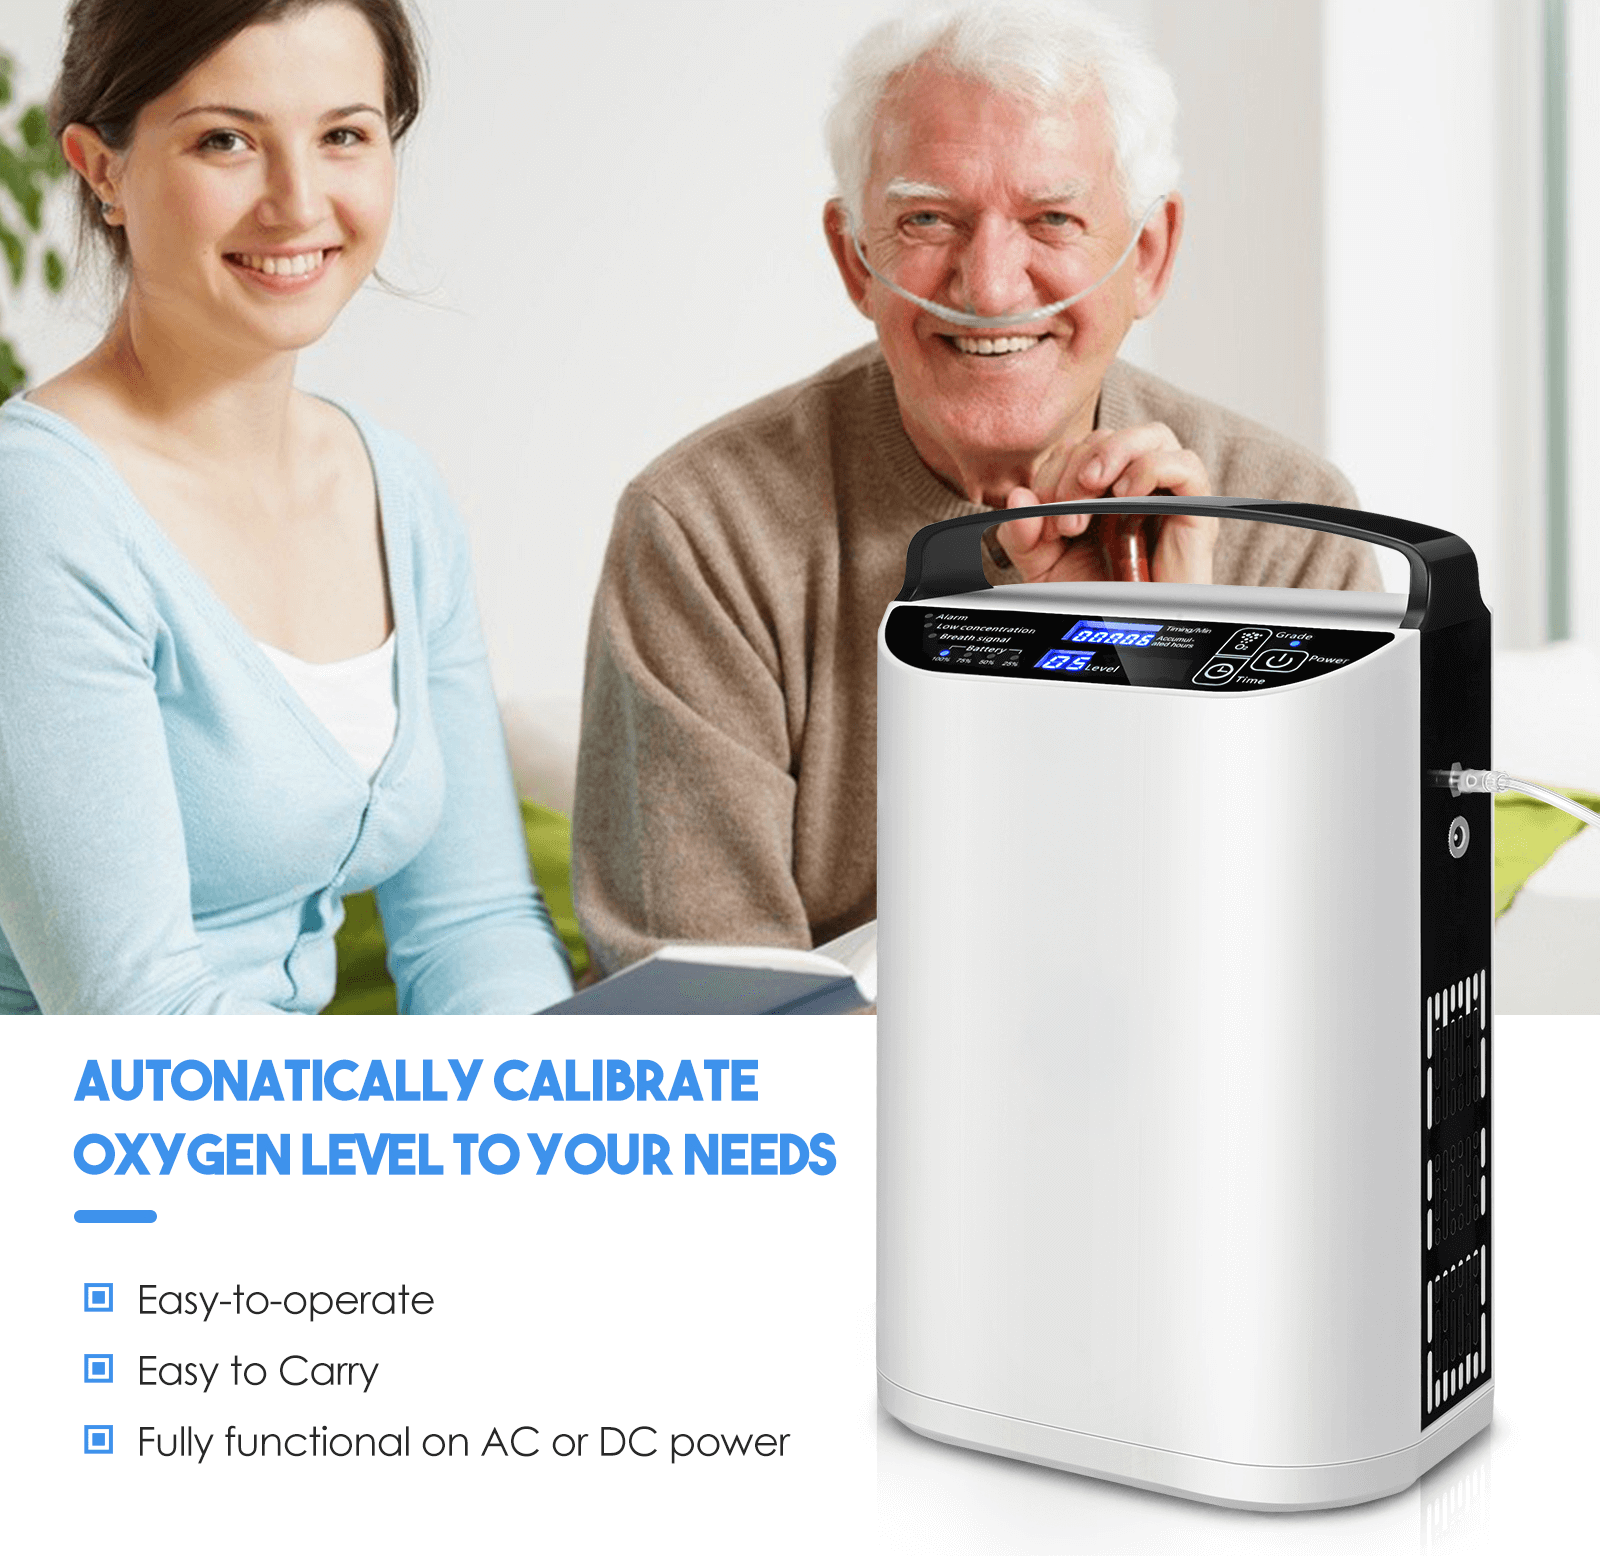 How To Clean Everflo Oxygen Concentrator Filter